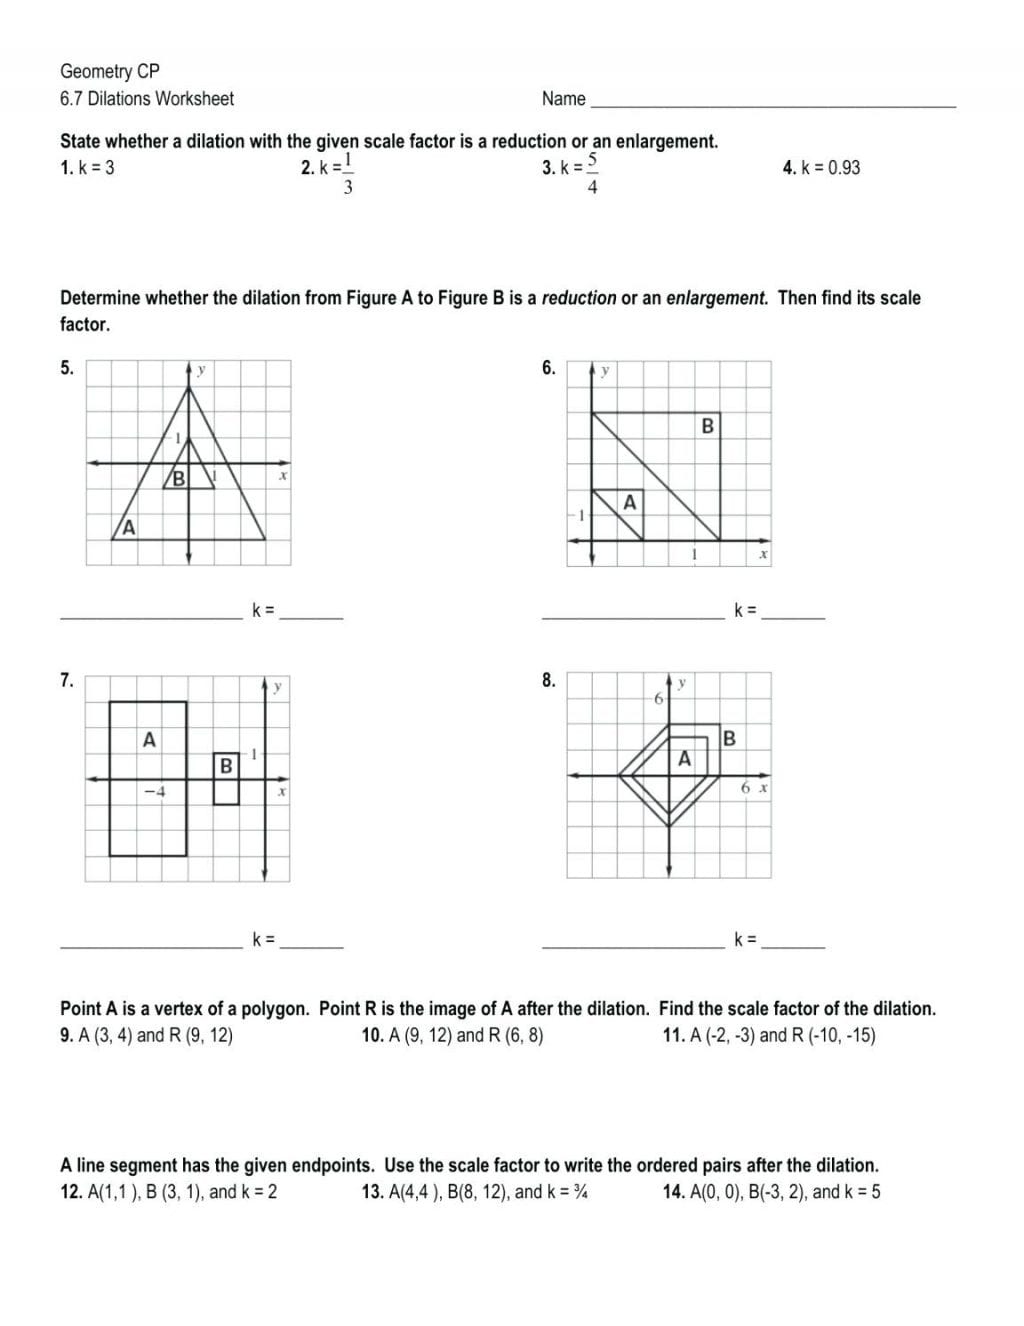 Geometry Cp 6 7 Dilations Worksheet Answers Db excel